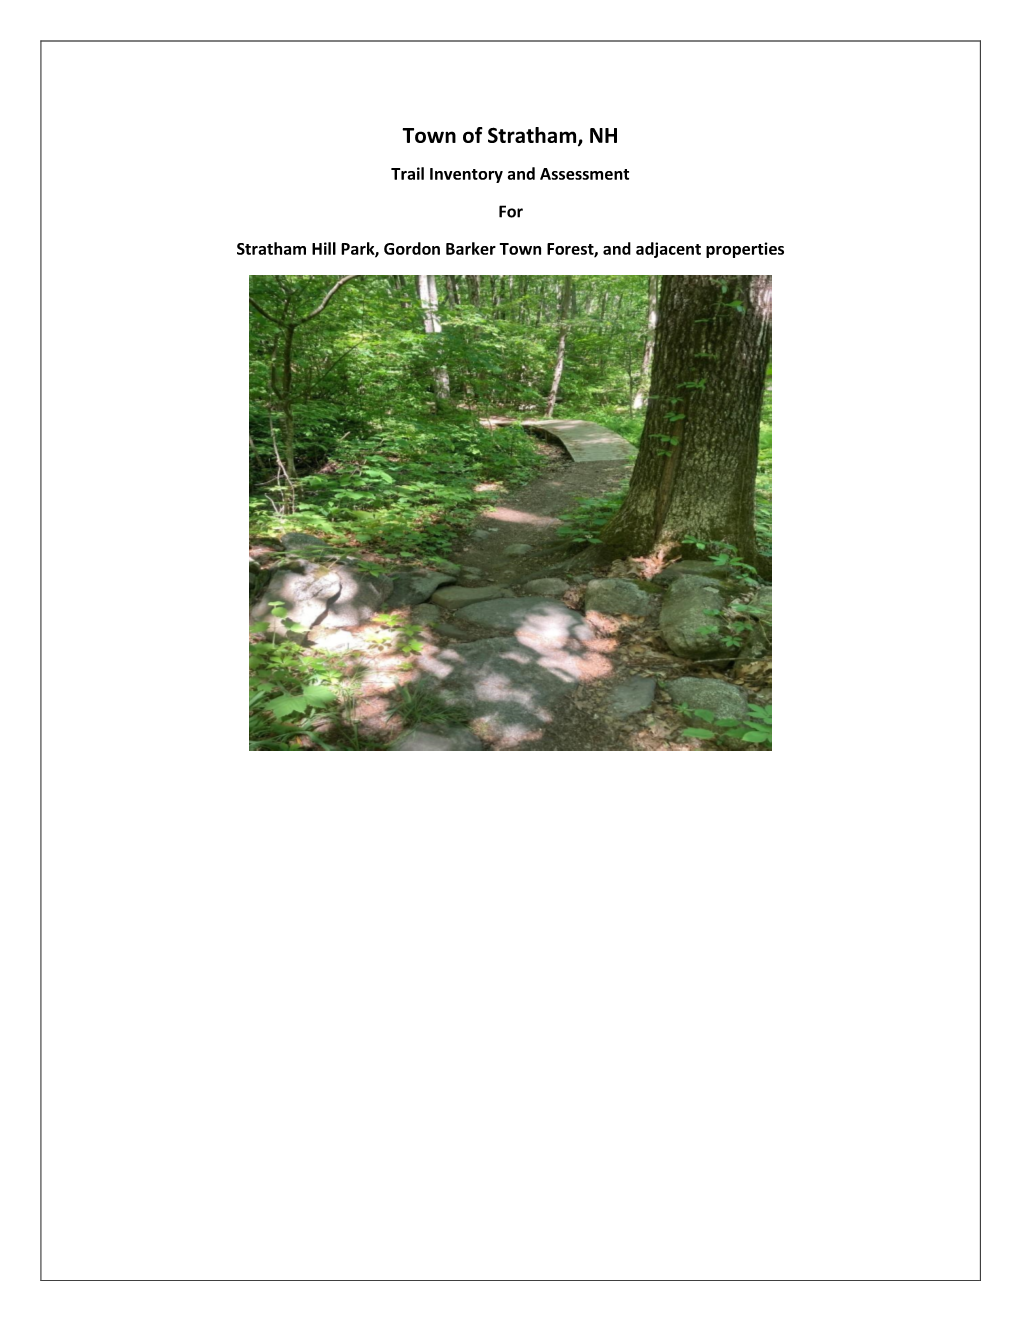 Trail Assessment with Recommendations, Photo Documentation, Annual Use Log